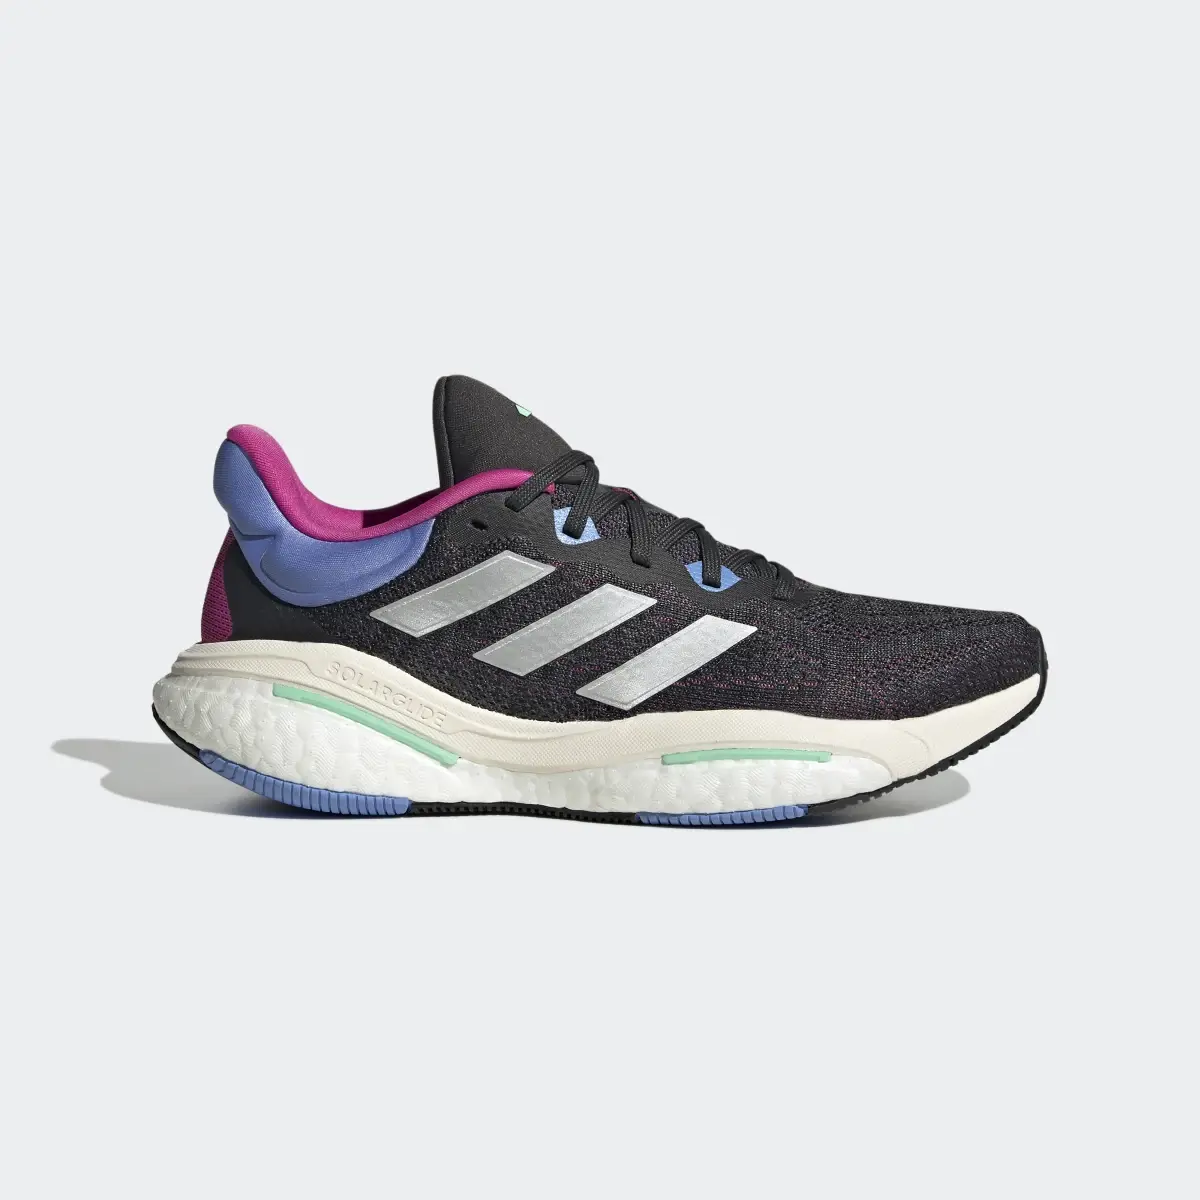 Adidas SOLARGLIDE 6 Running Shoes. 2